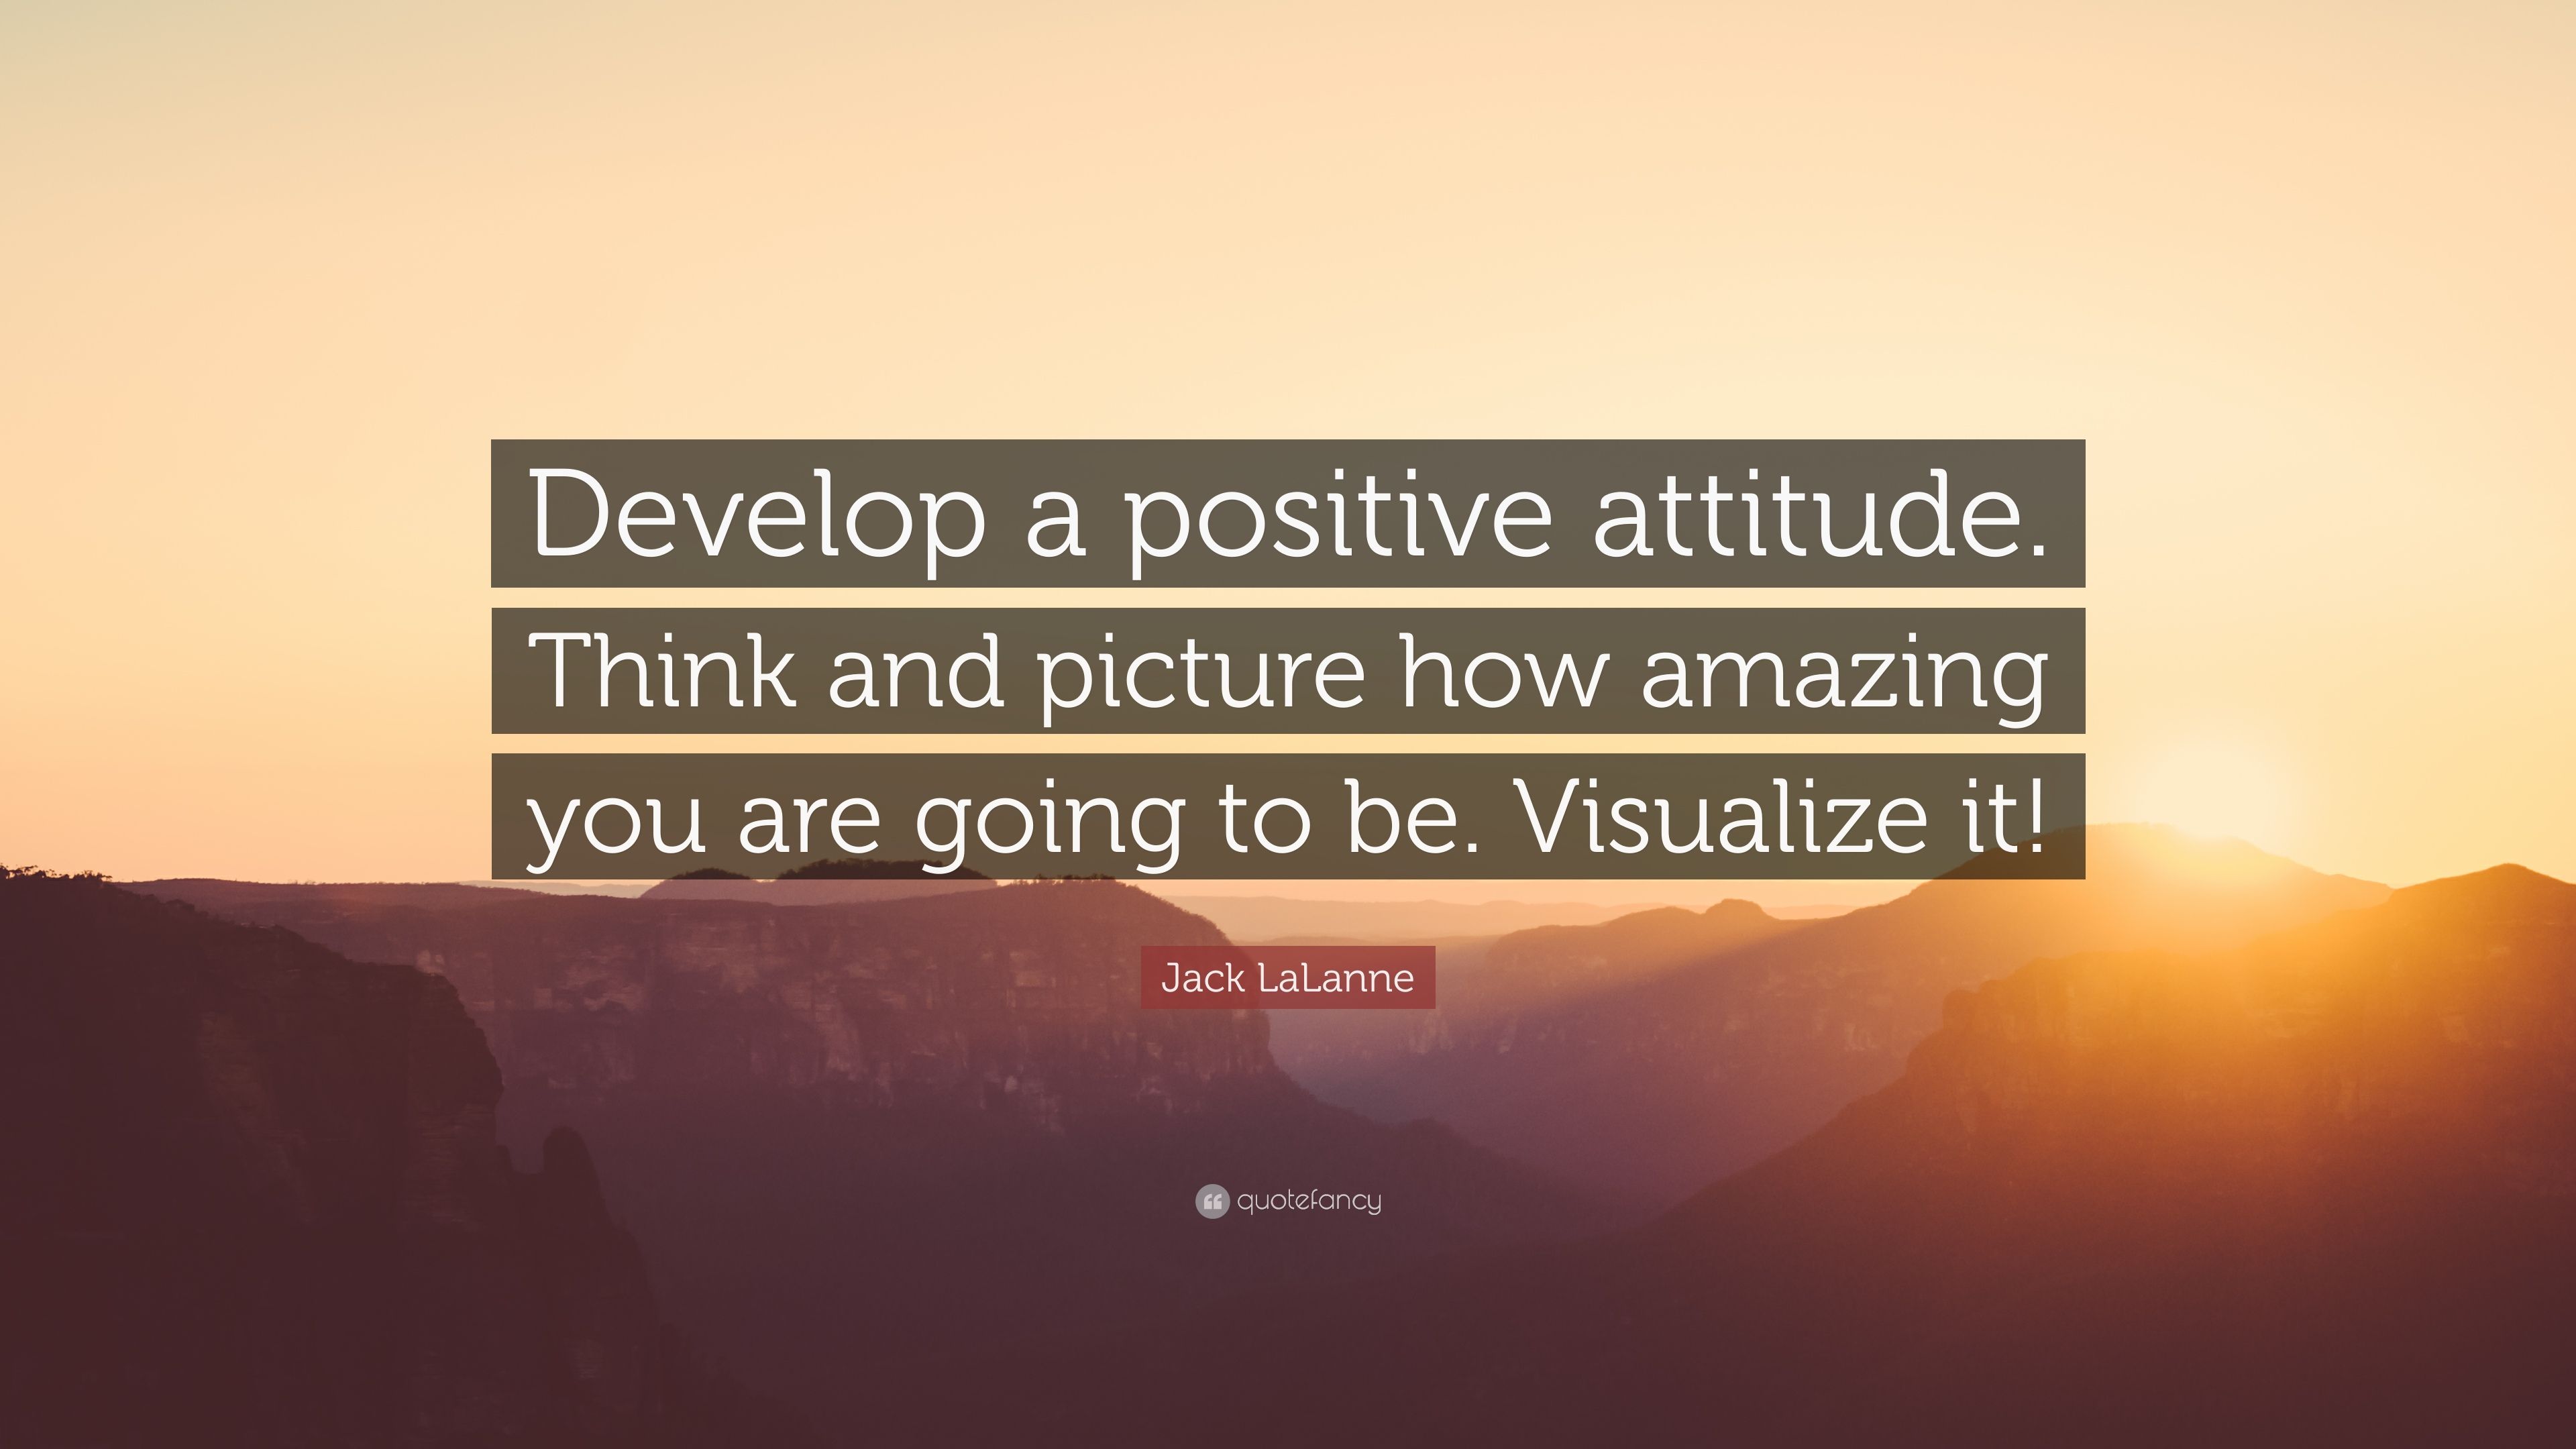 Jack LaLanne Quote: “Develop a positive attitude. Think and picture how amazing you are going to be. Visualize it!” (7 wallpaper)